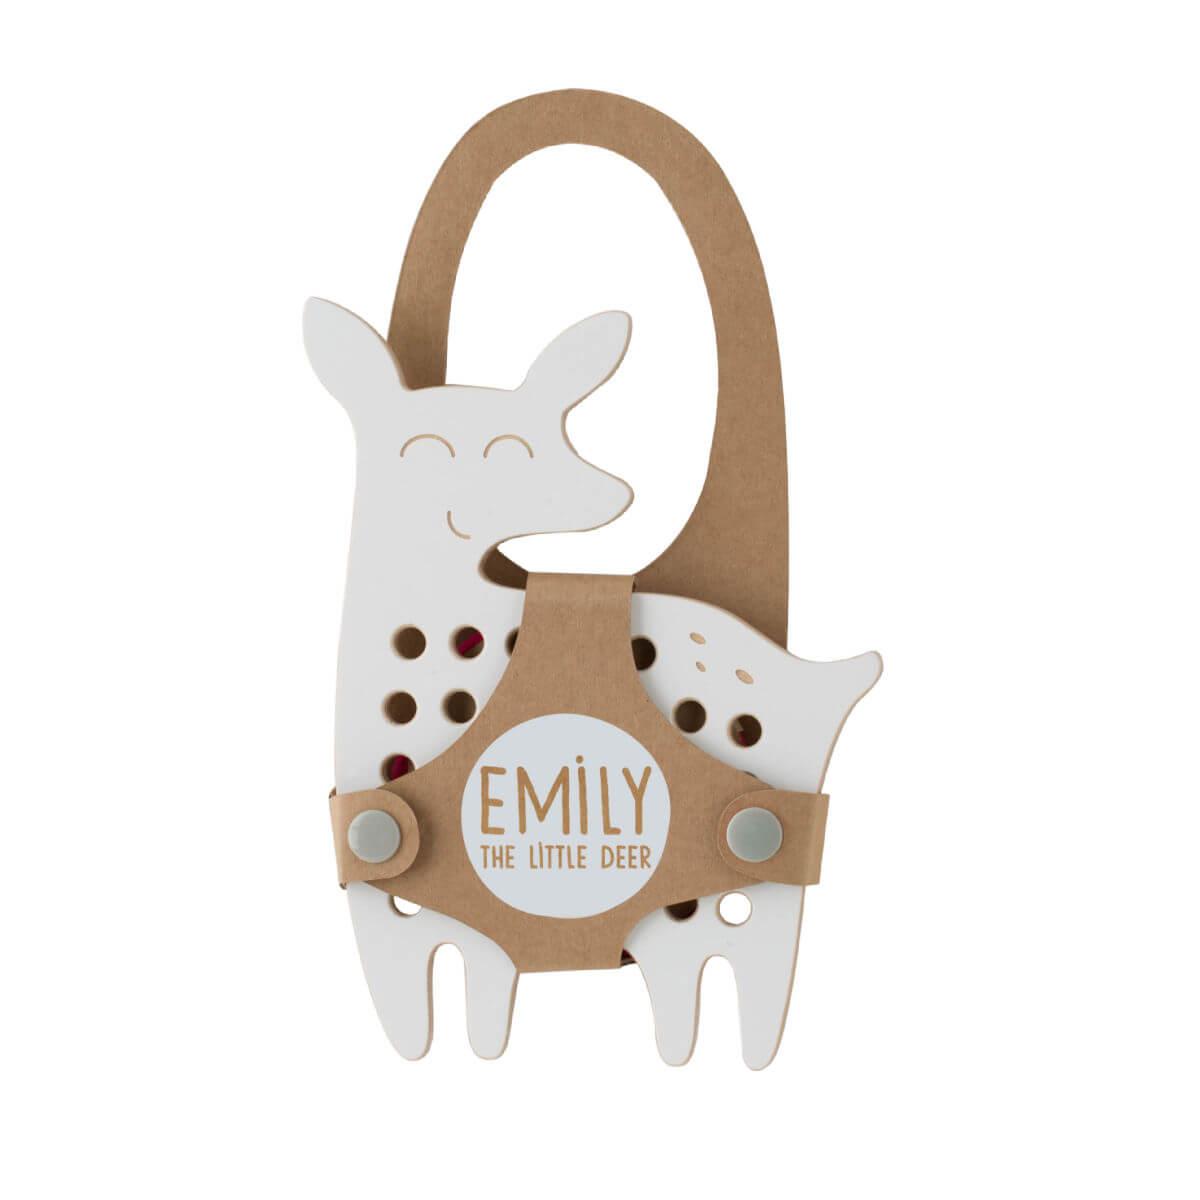 milin toys wooden lacing toy emily the deer